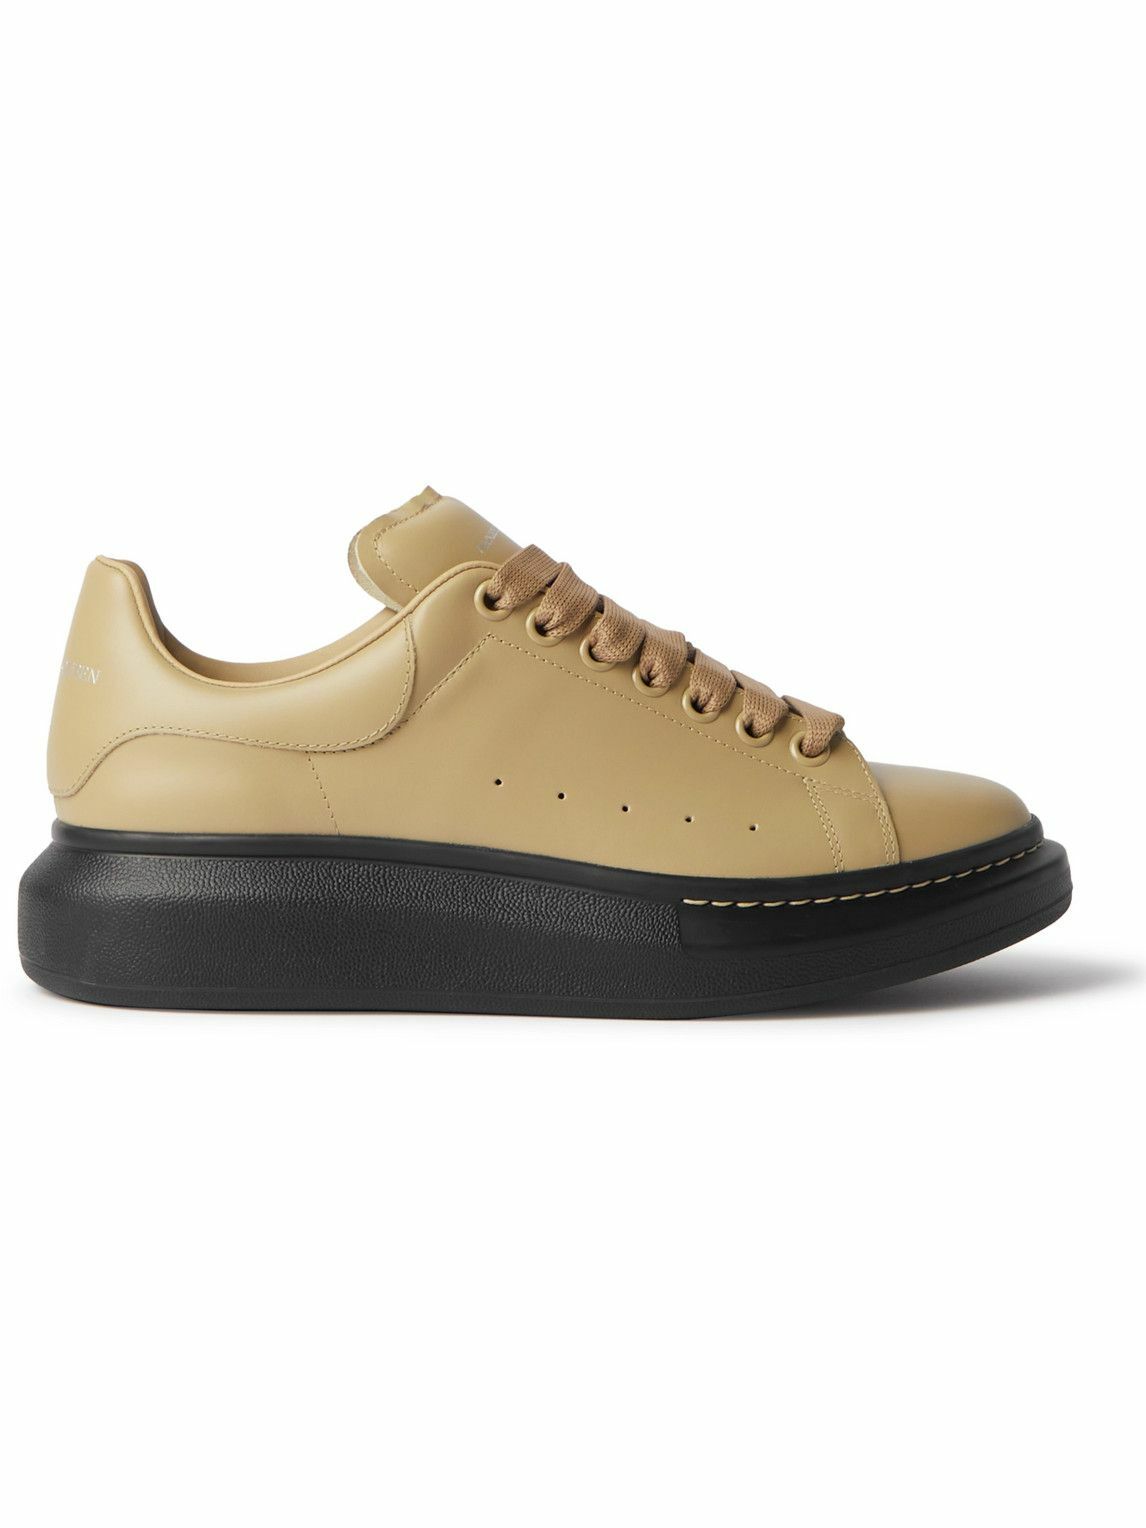 Alexander McQueen - Exaggerated-Sole Leather Sneakers - Brown Alexander ...